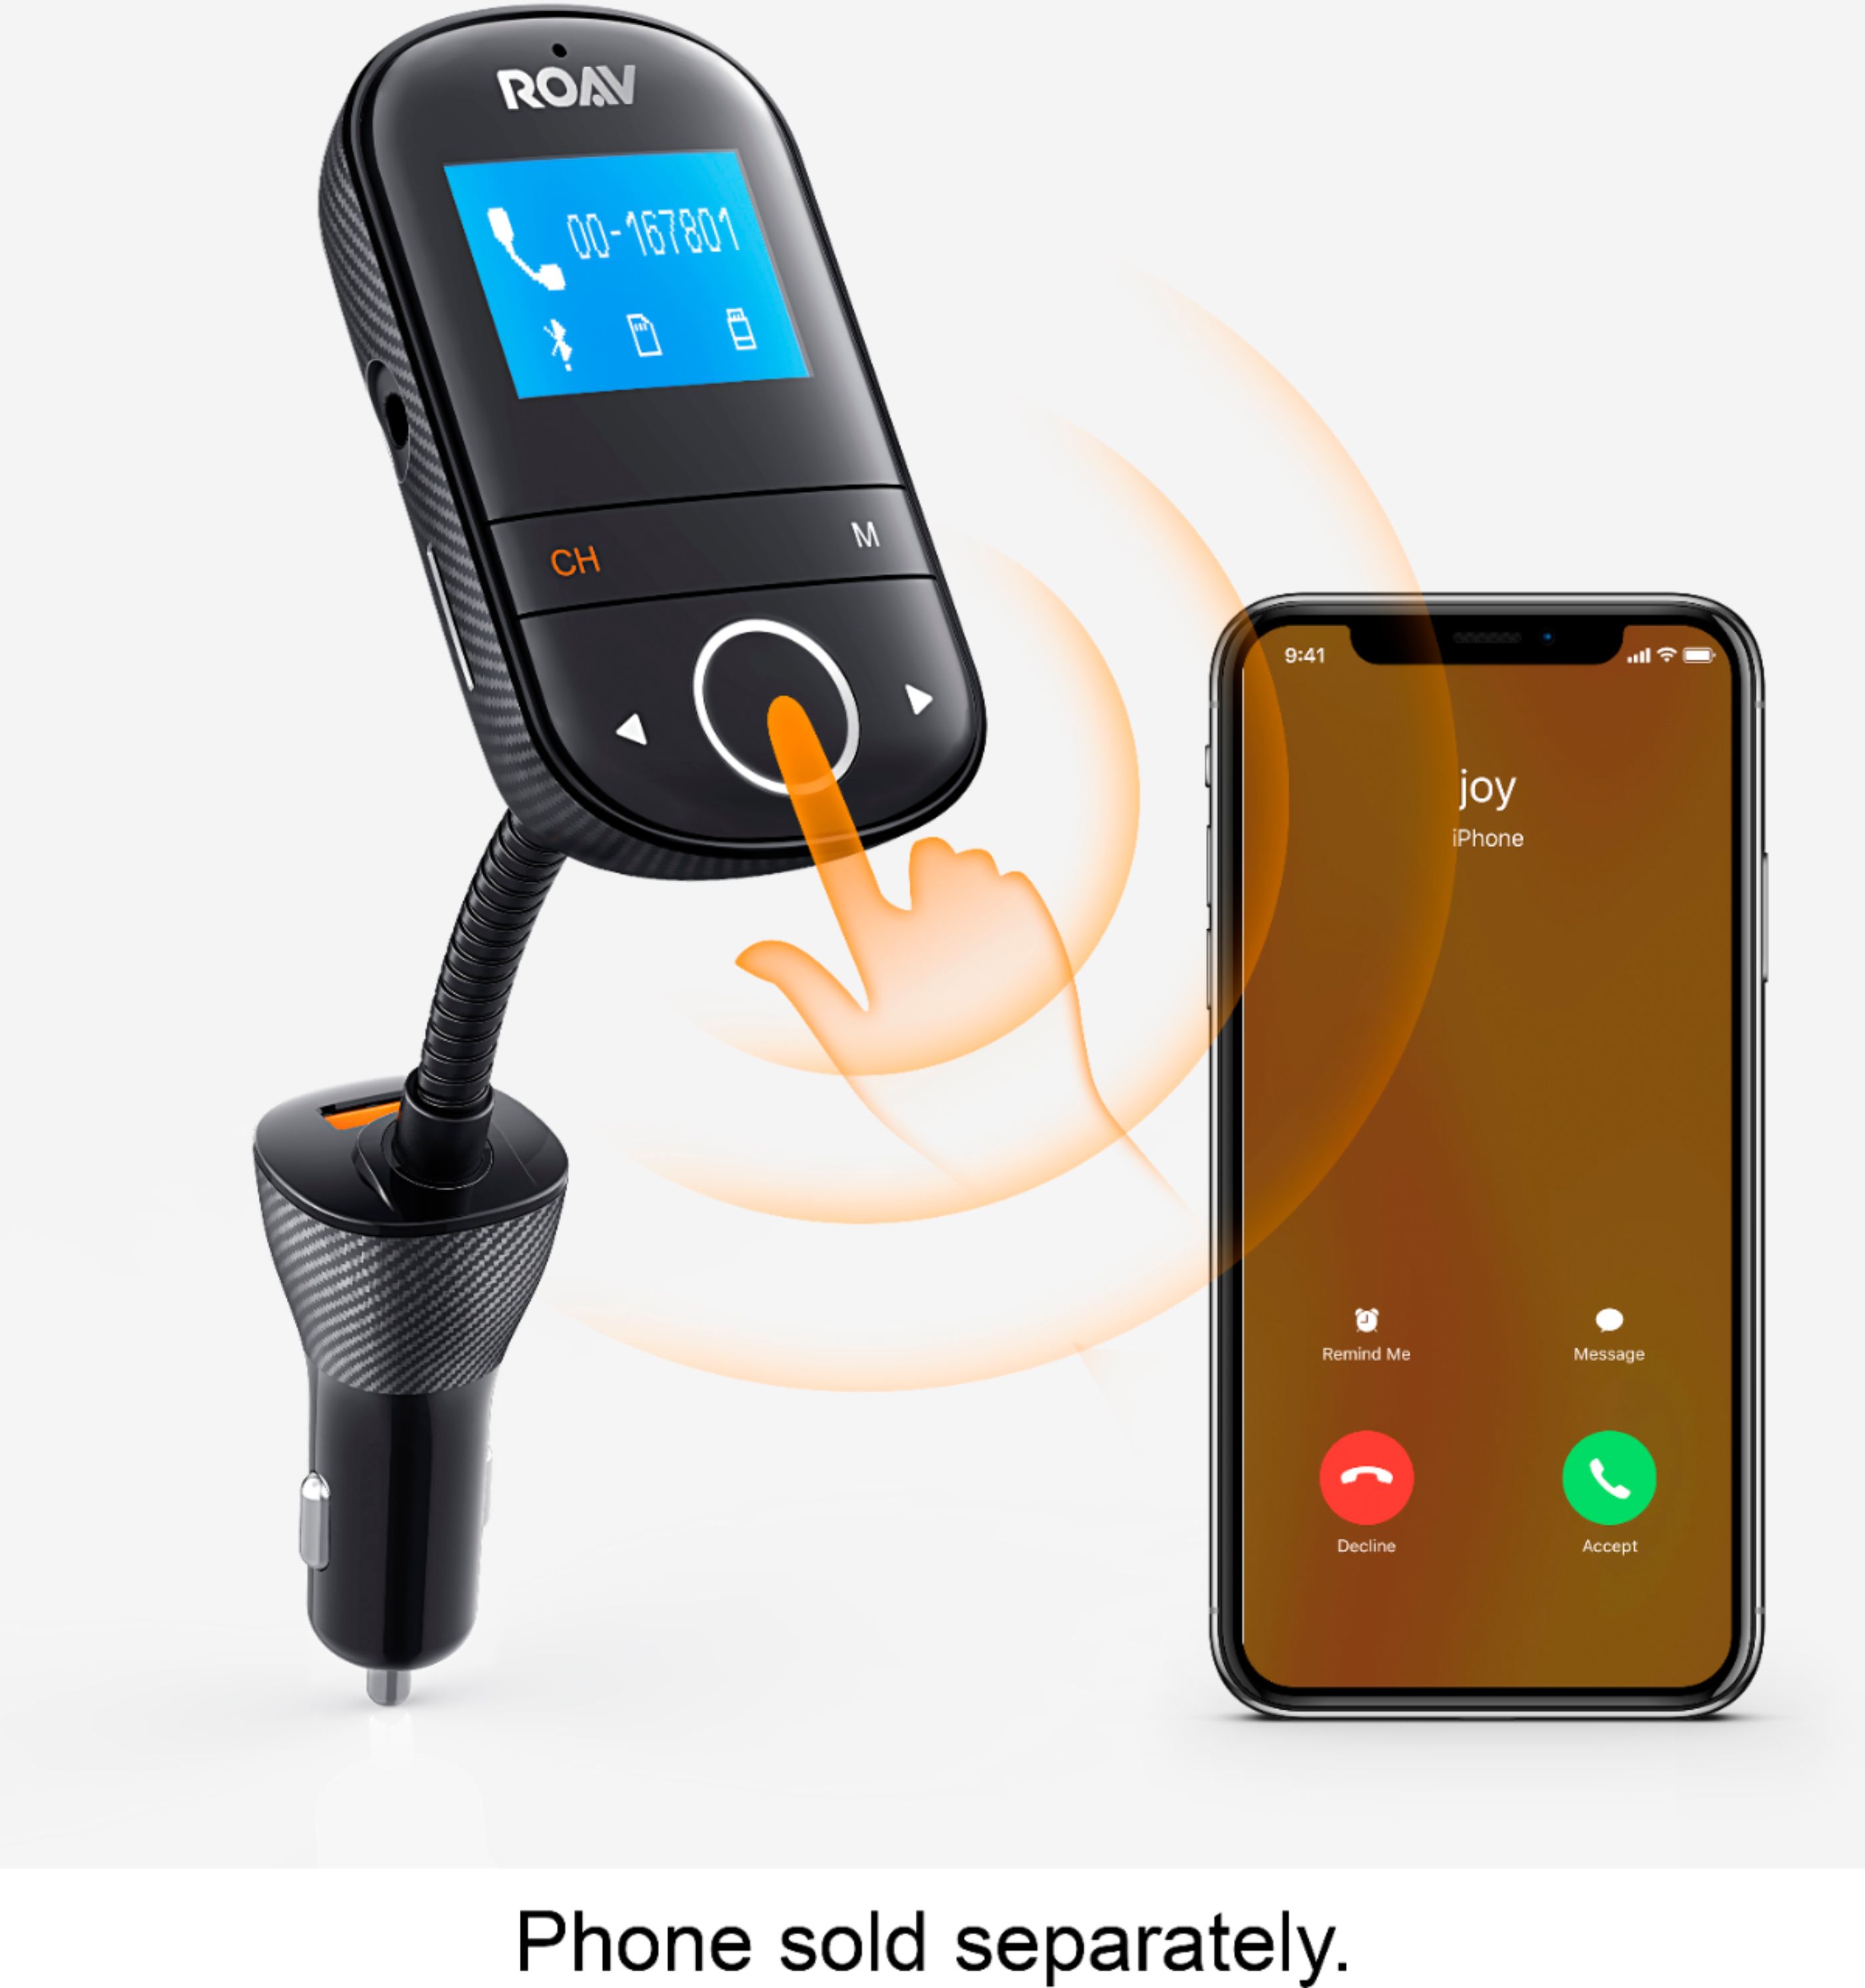 Roav Bluetooth FM Transmitter with Car Charger by Anker